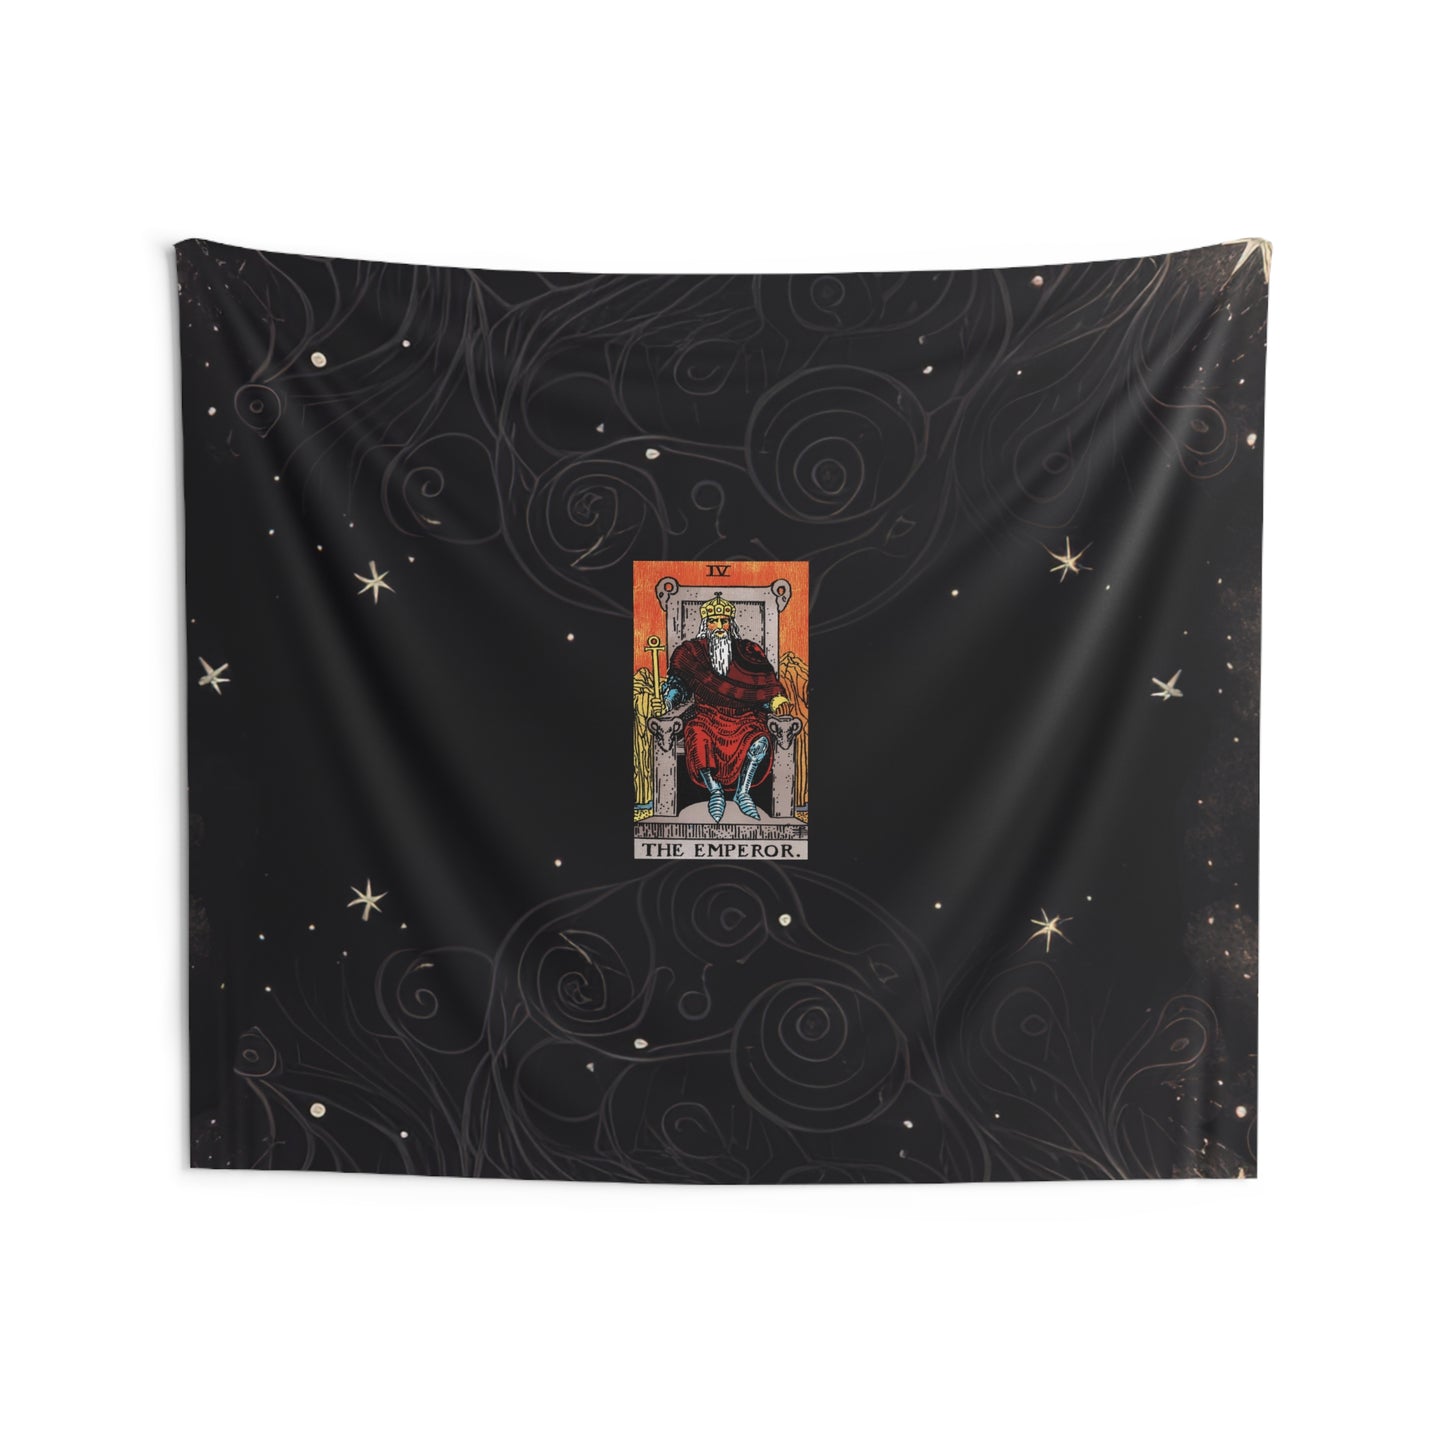 The Emperor Tarot Card Altar Cloth or Tapestry with Starry Background